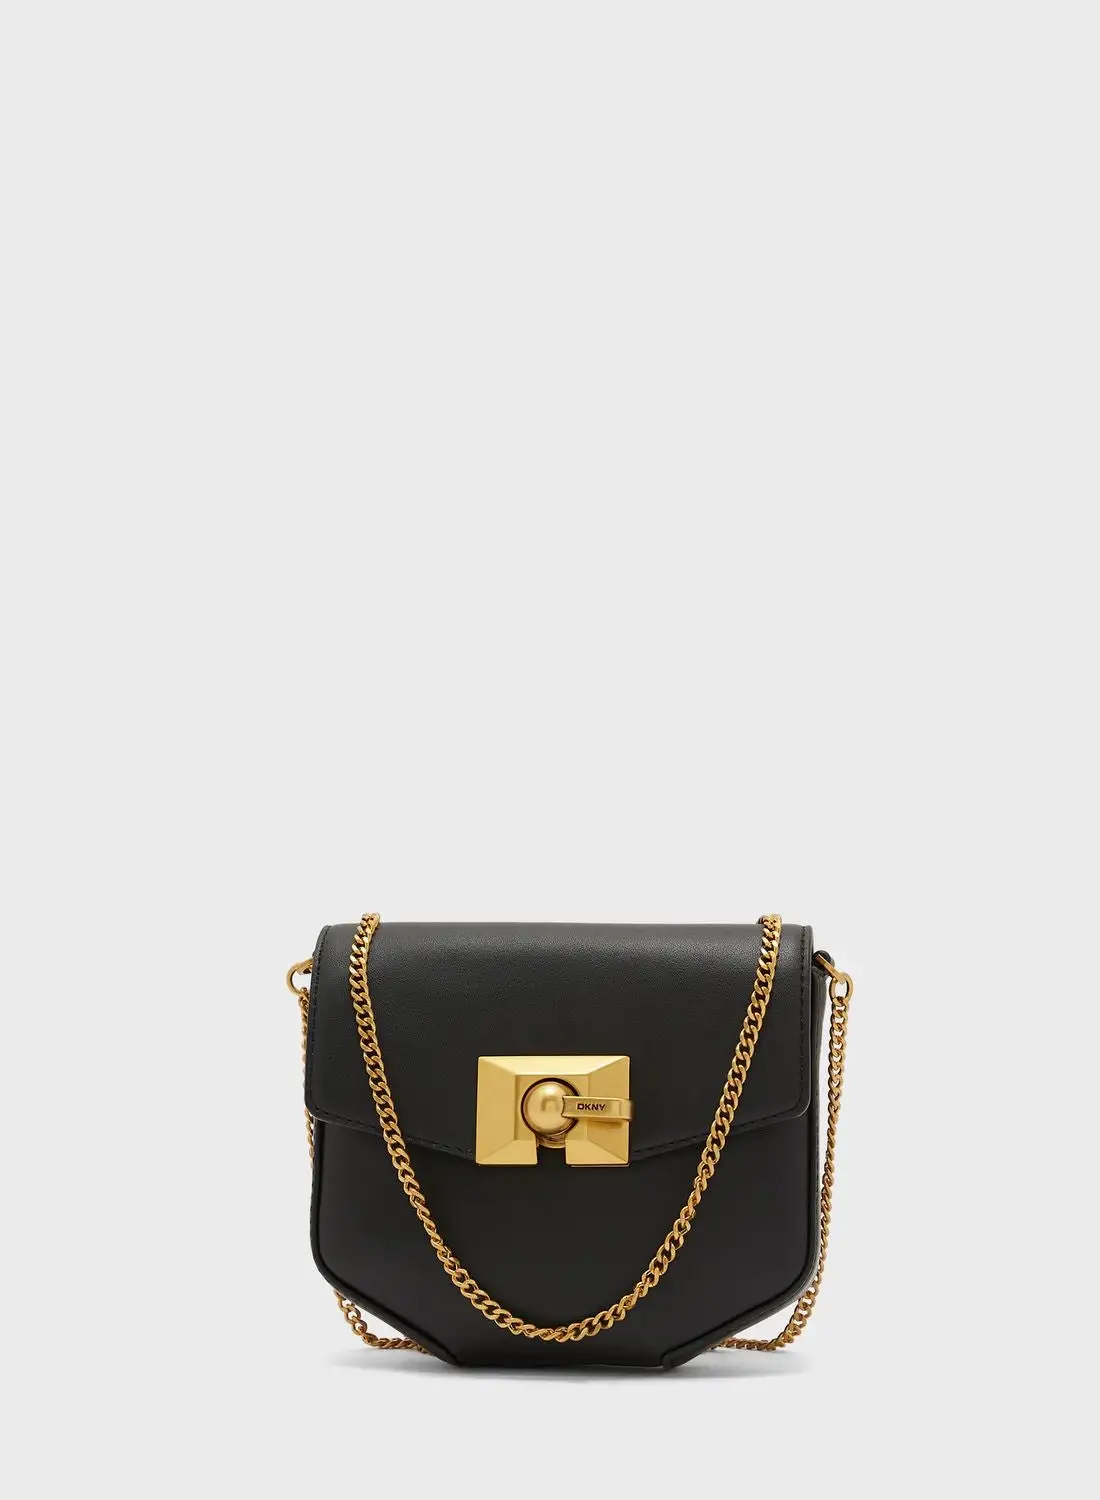 DKNY Colette Flap Over Crossbody Bags